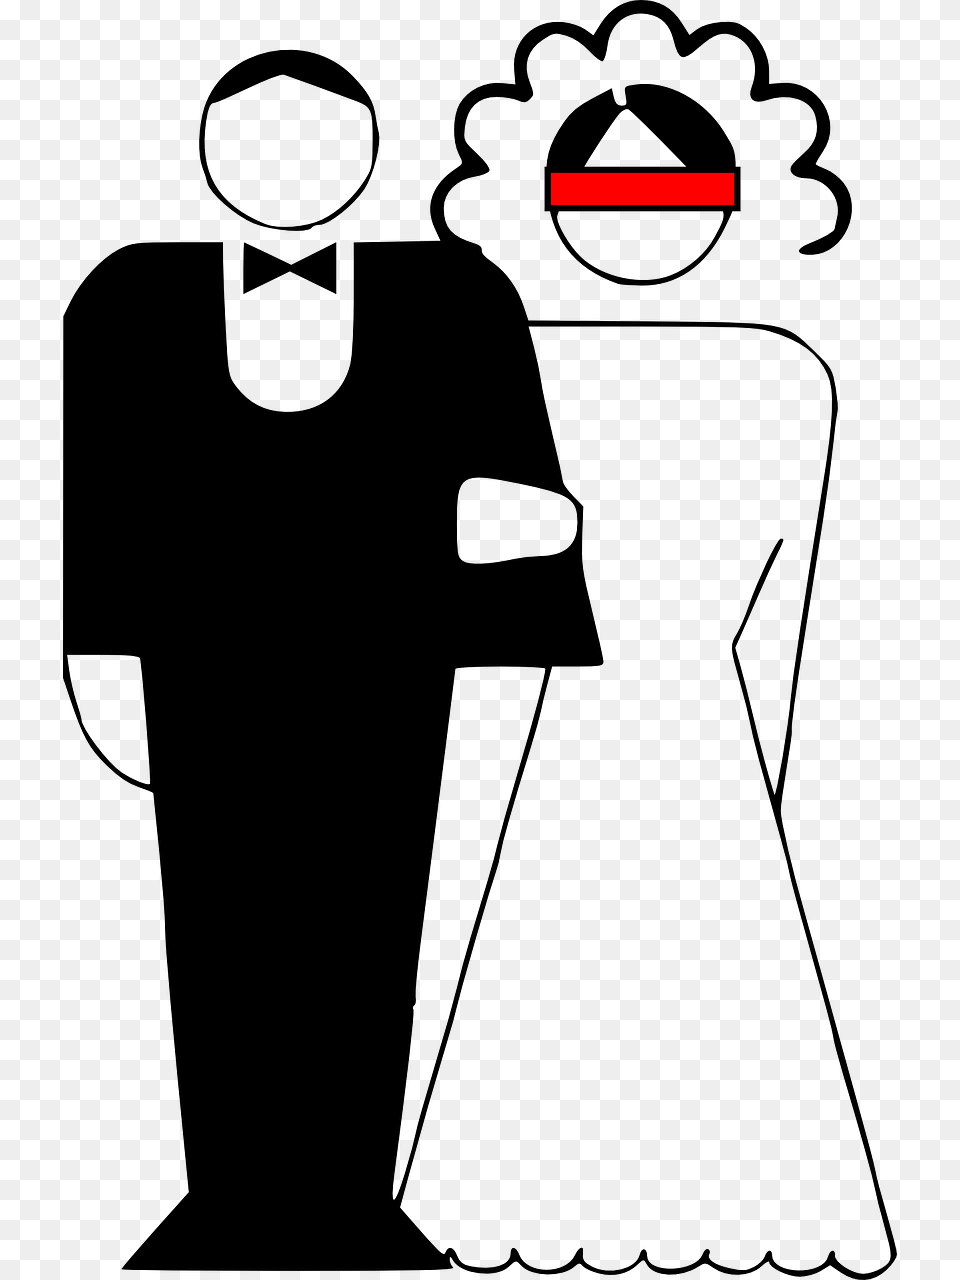 Wedding Wedding Couple Bride Groom Marriage Marriage Black And White Png Image